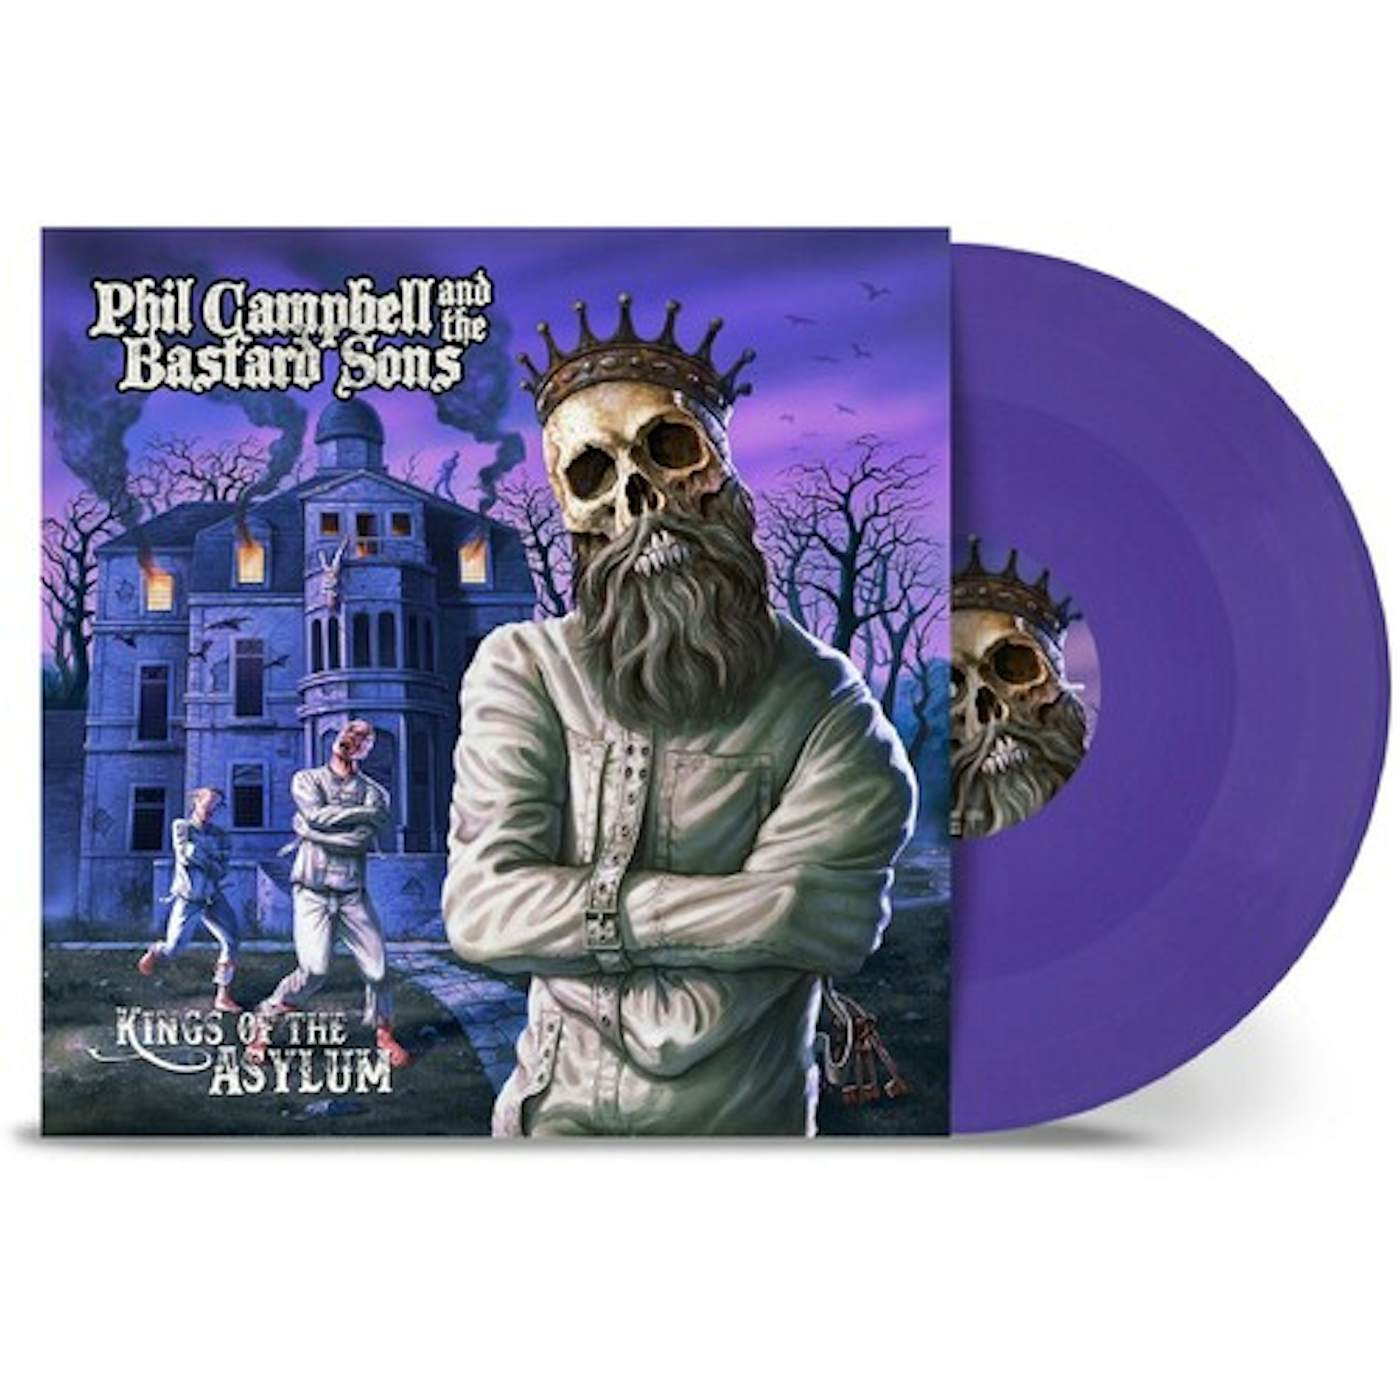 Phil Campbell and the Bastard Sons KINGS OF THE ASYLUM - PURPLE Vinyl Record